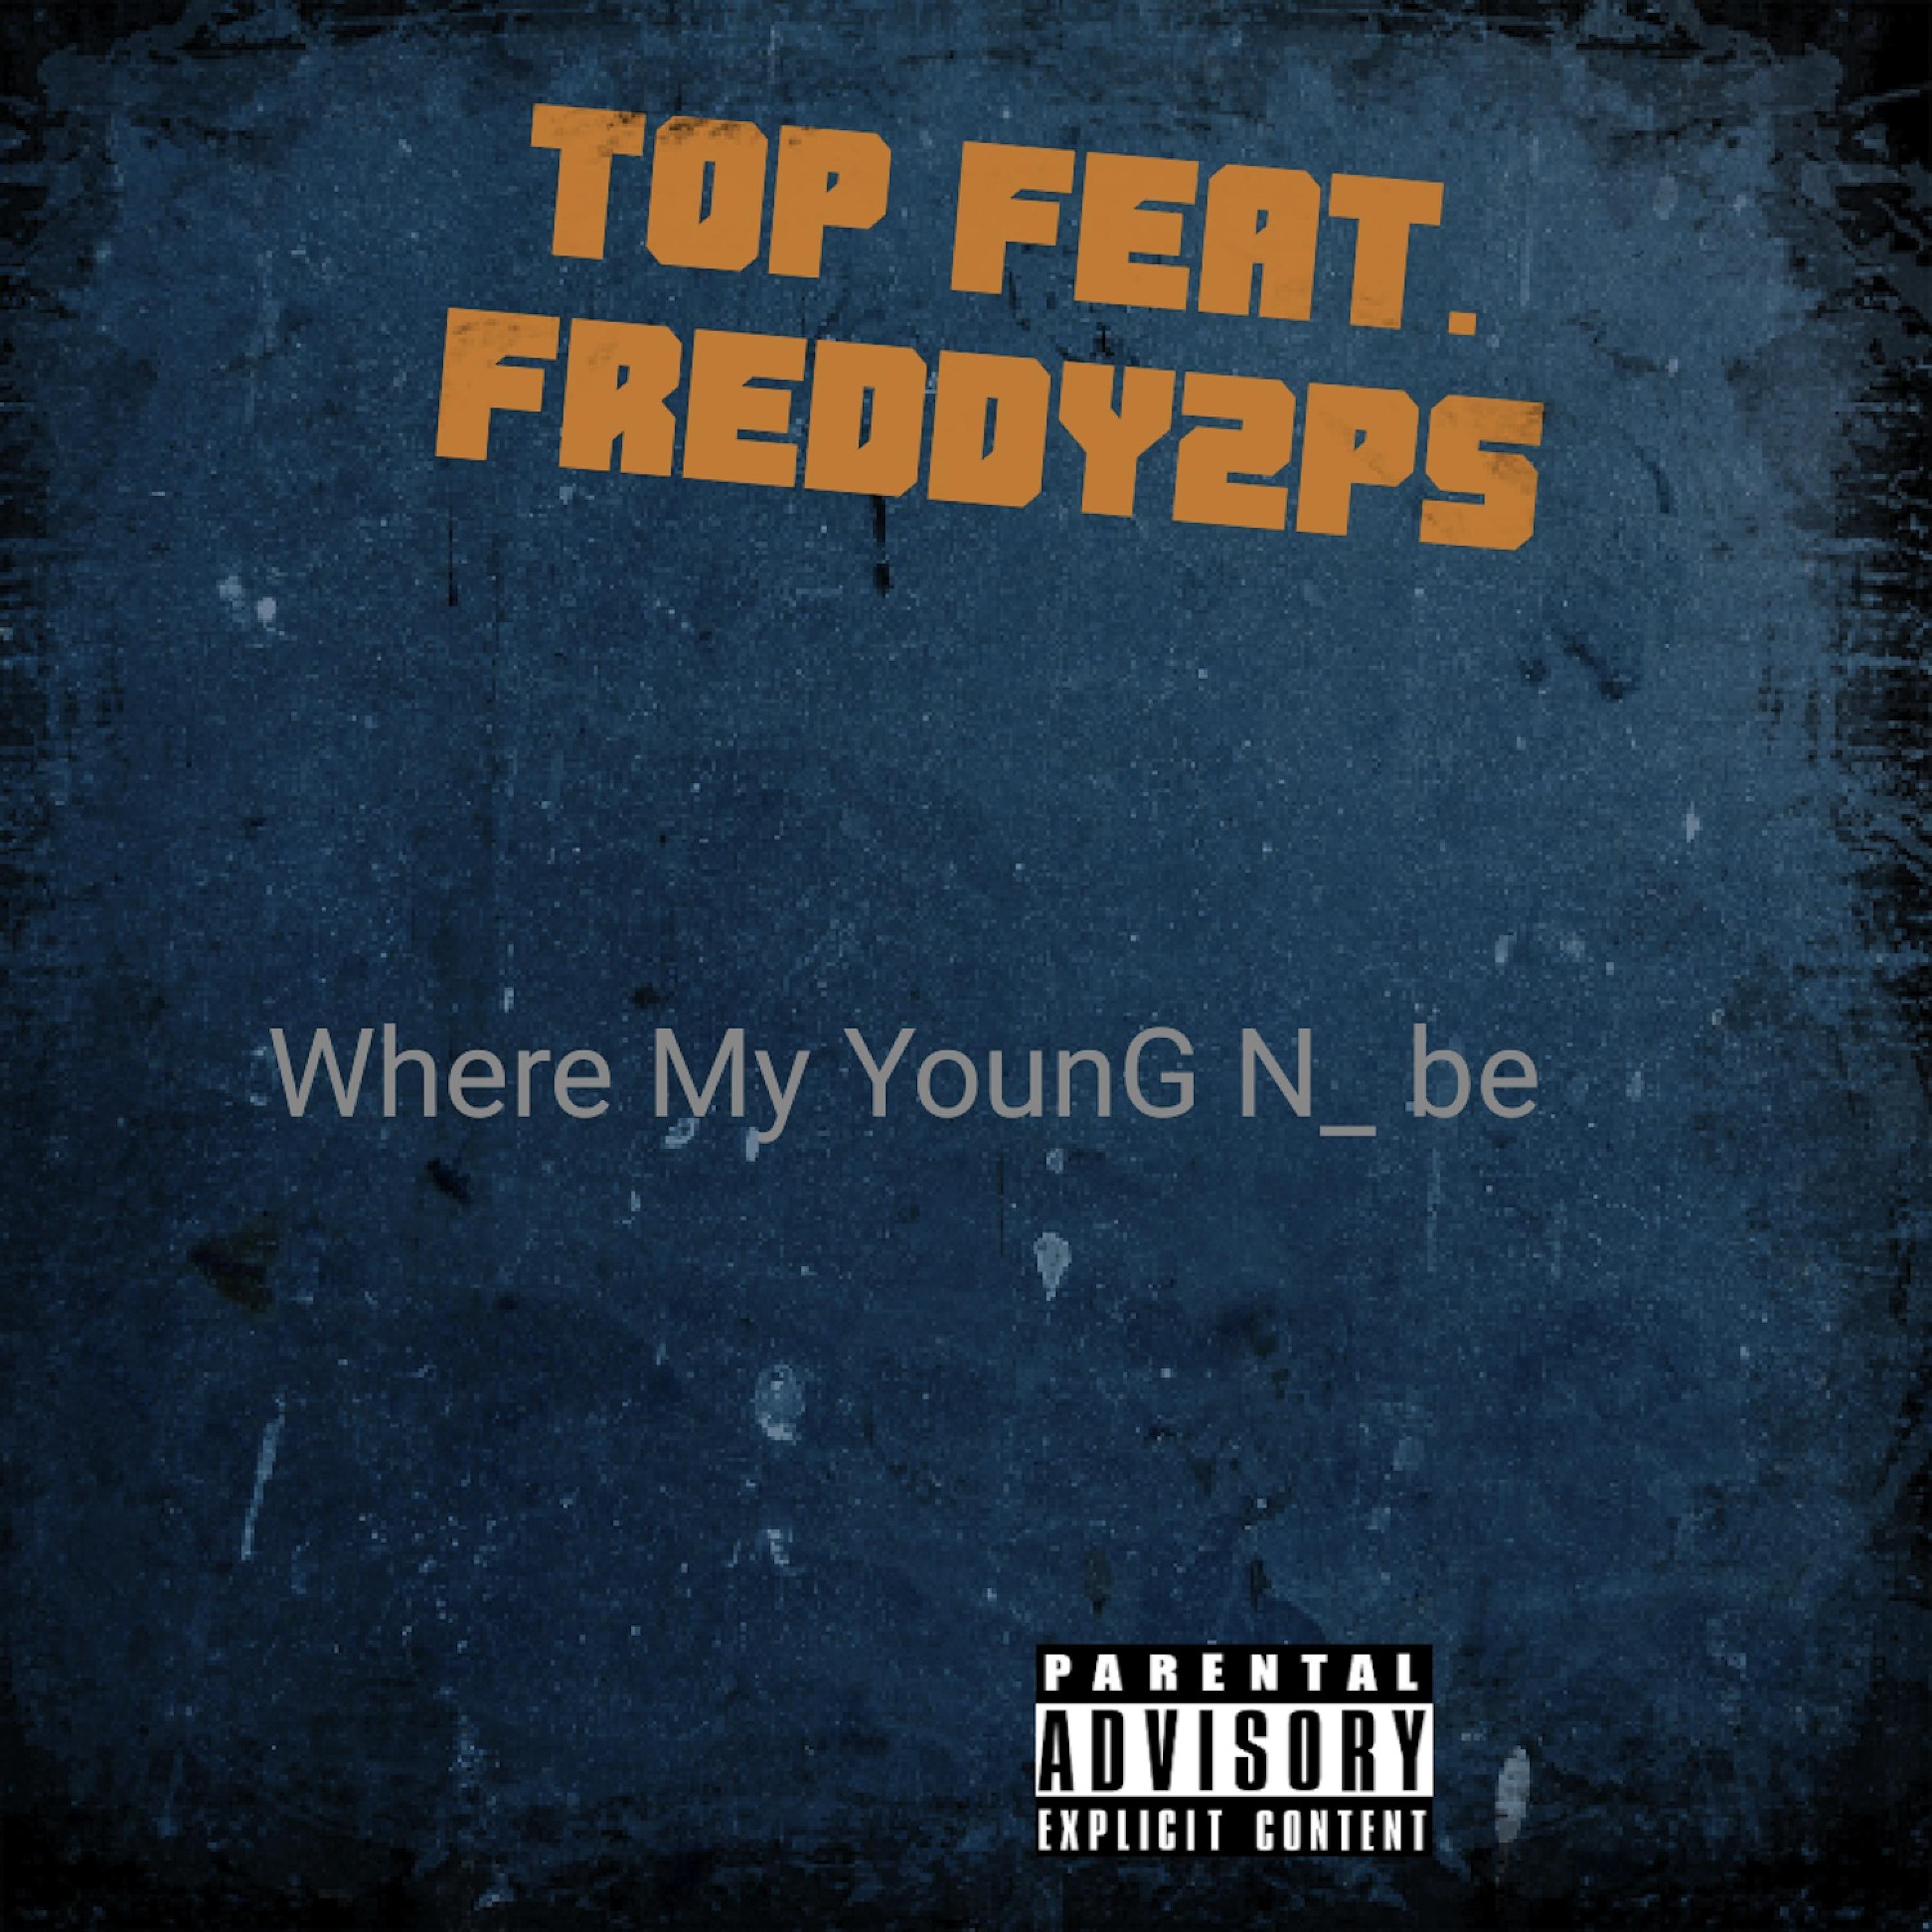 Where My Young N Be (feat. Freddy2ps) - Single